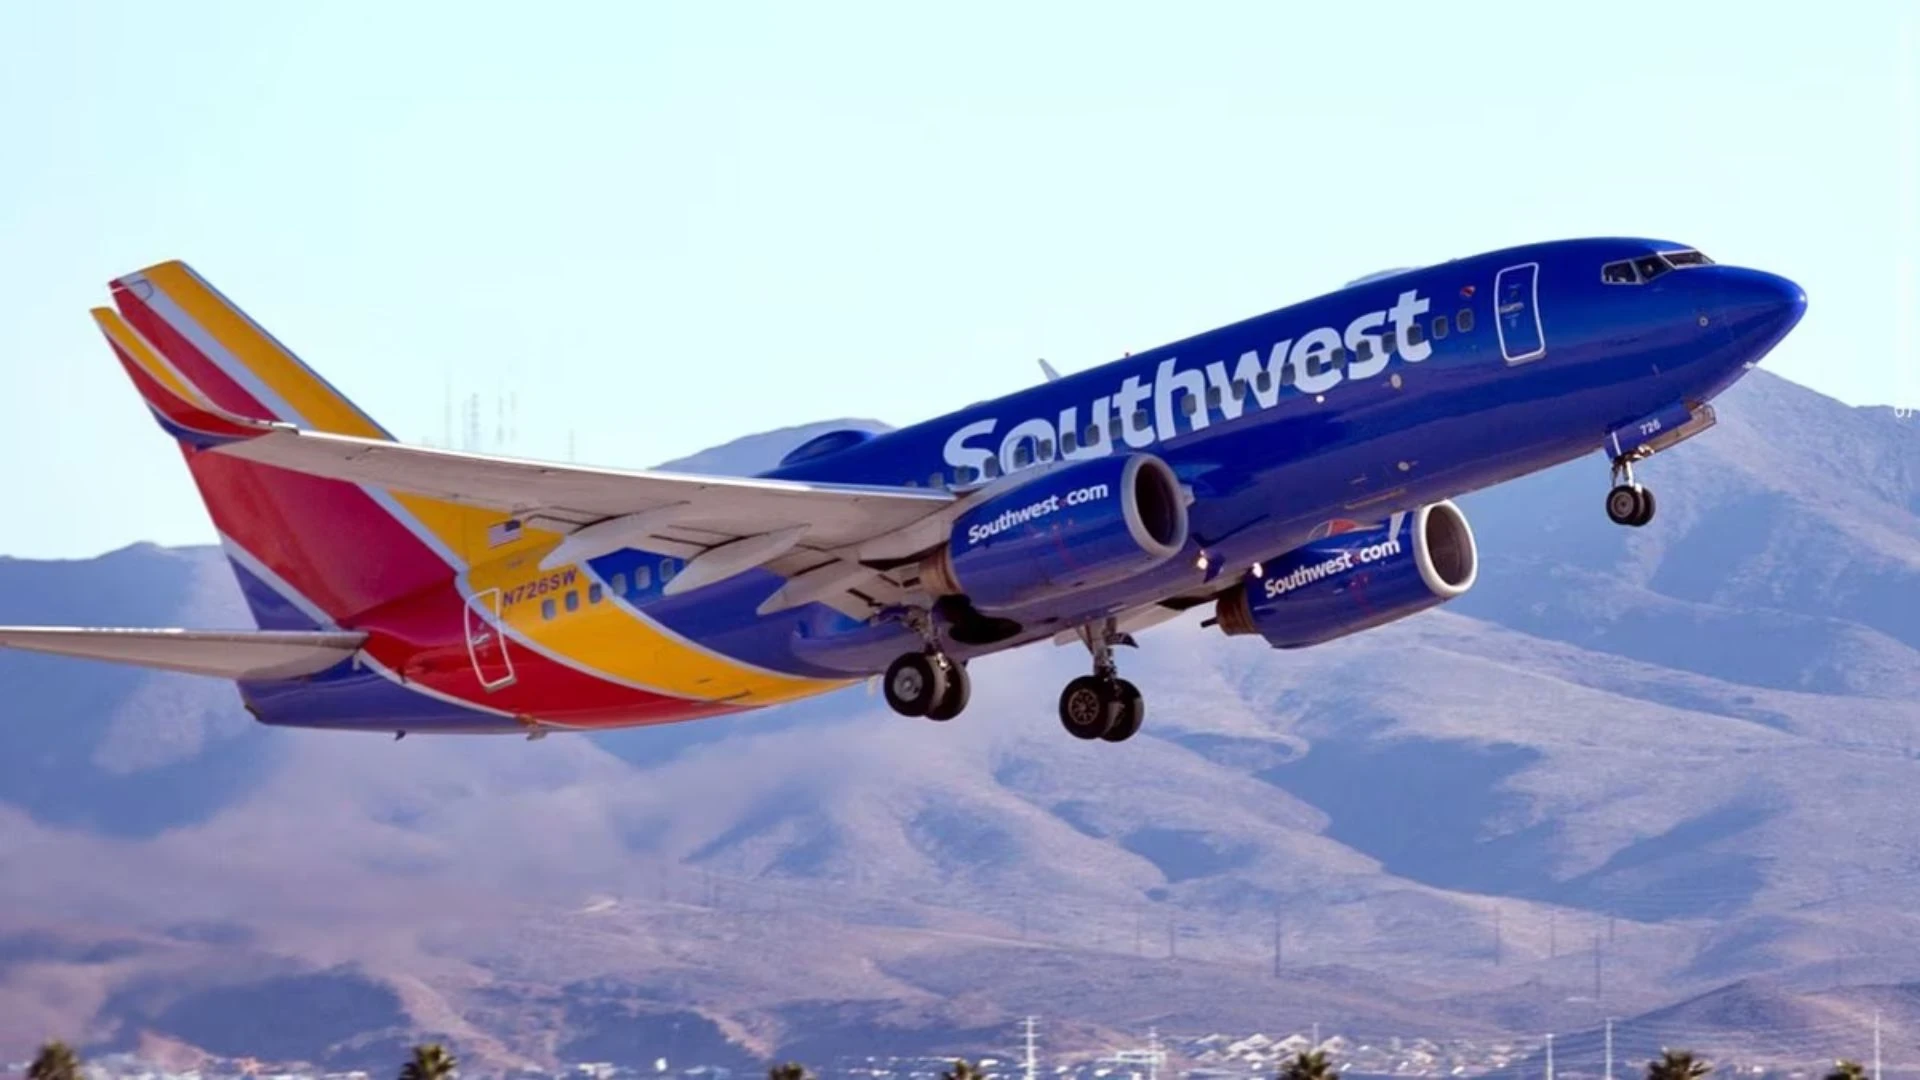 Who is the owner of Southwest Airlines